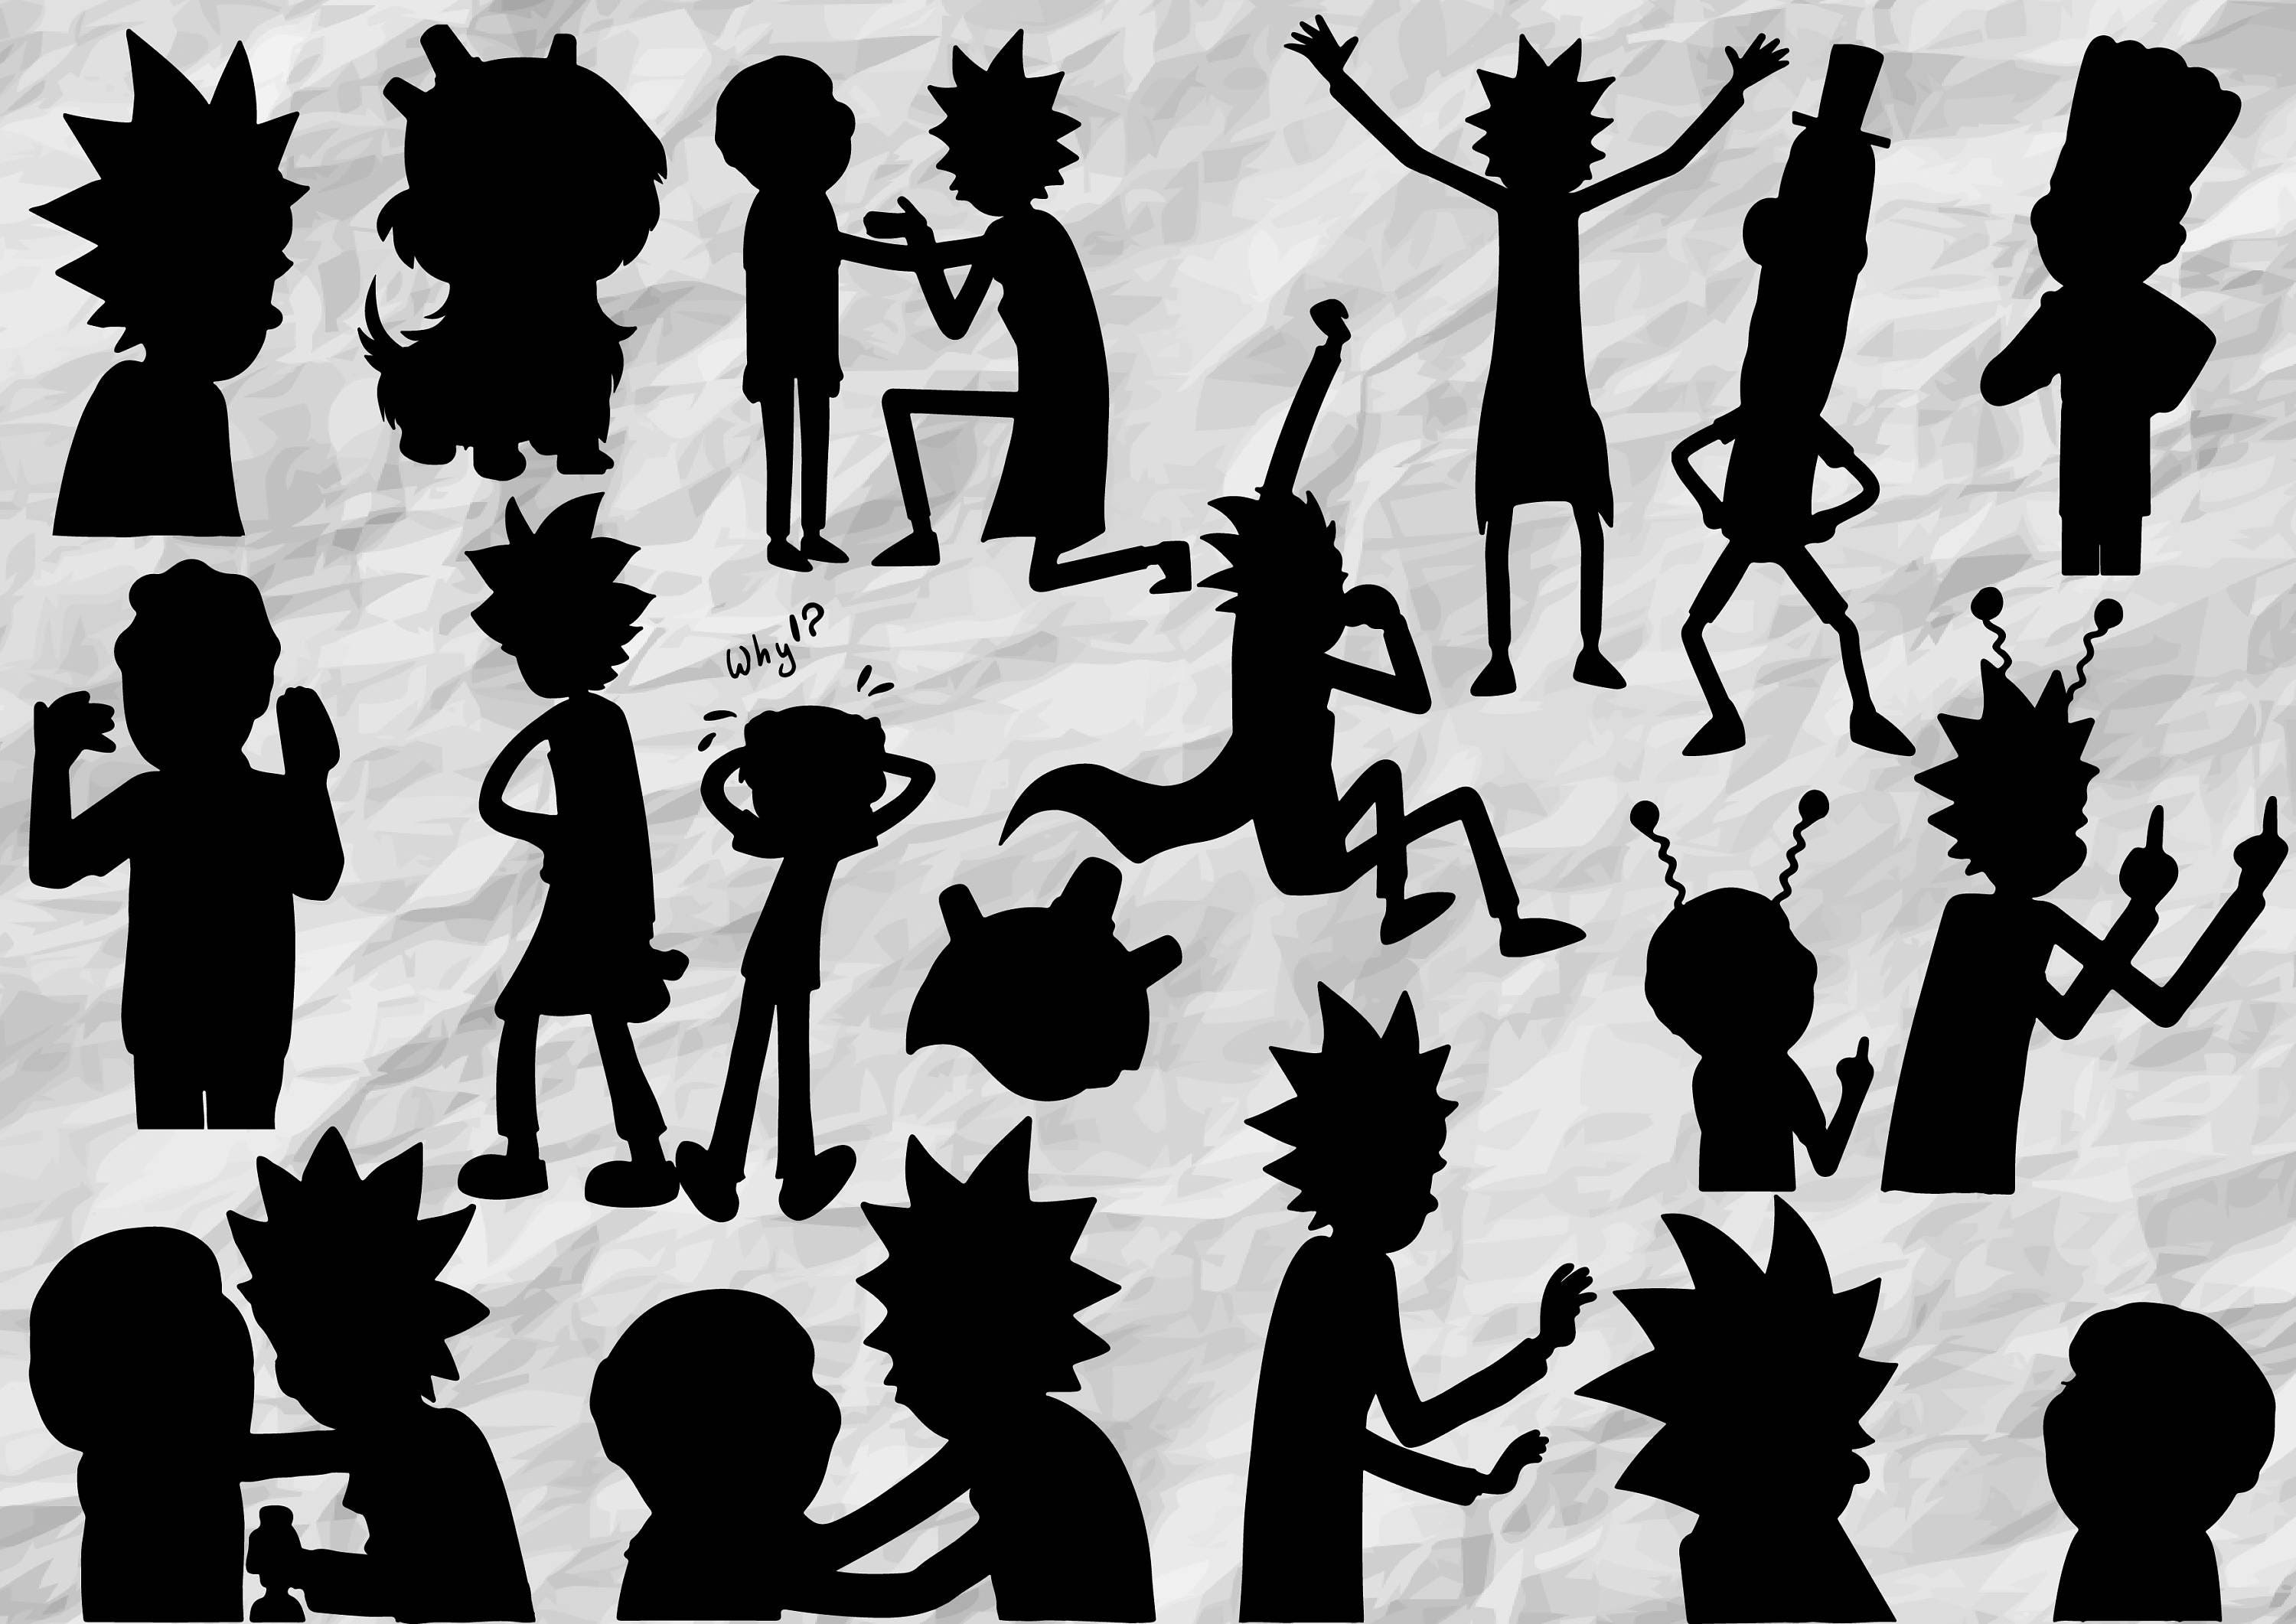 Download 15 Rick and Morty Silhouettes | Rick and Morty Cliparts ...